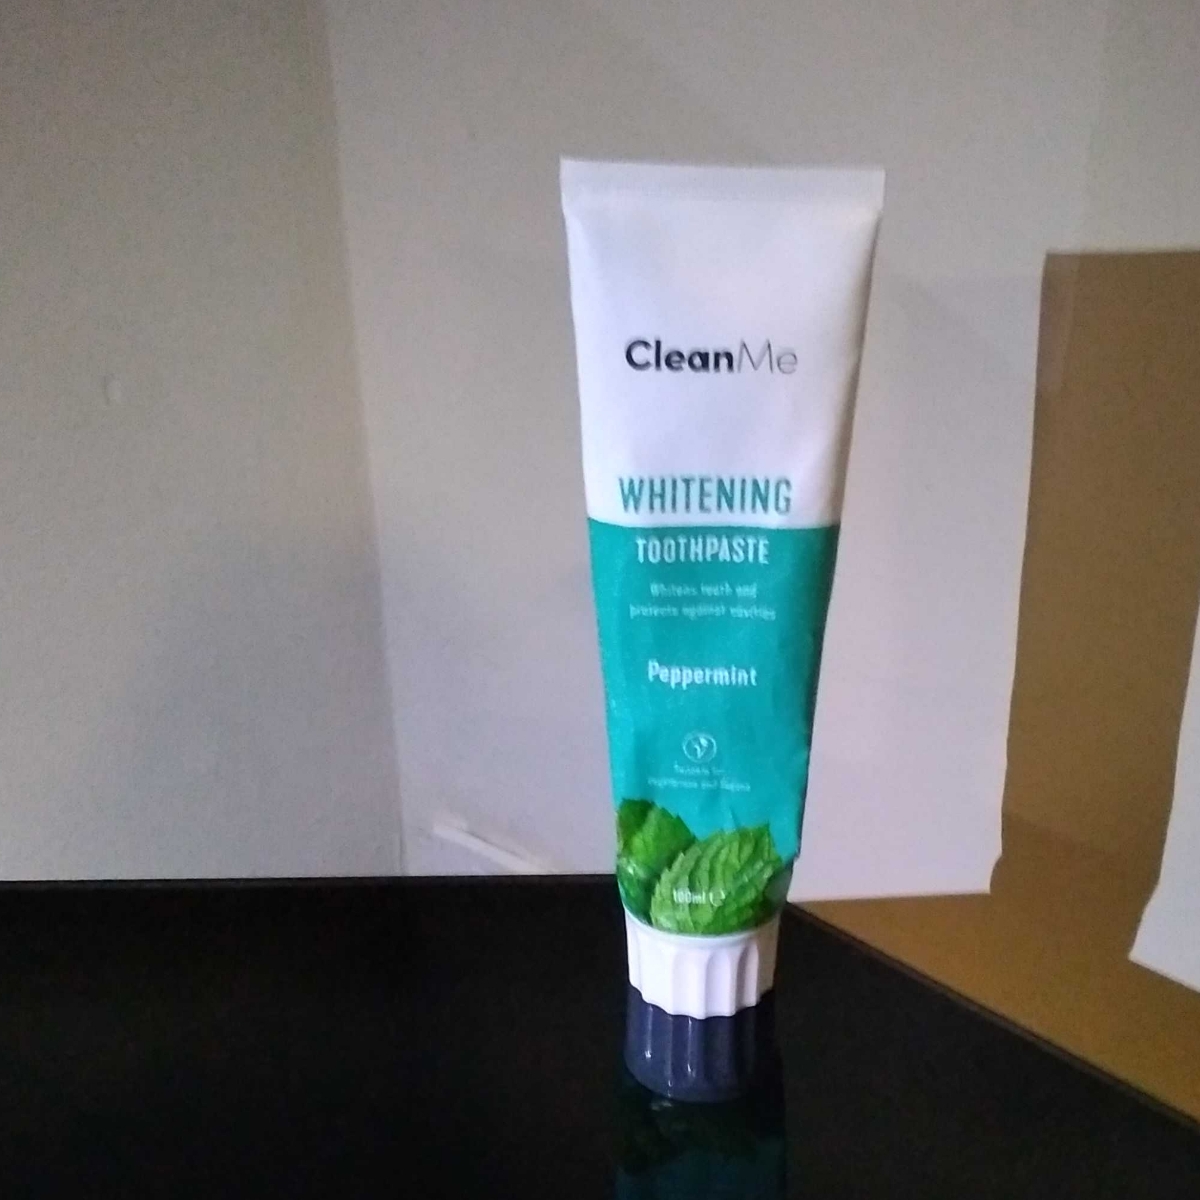 Clean Me WHITENING TOOTHPASTE Peppermint Reviews | abillion